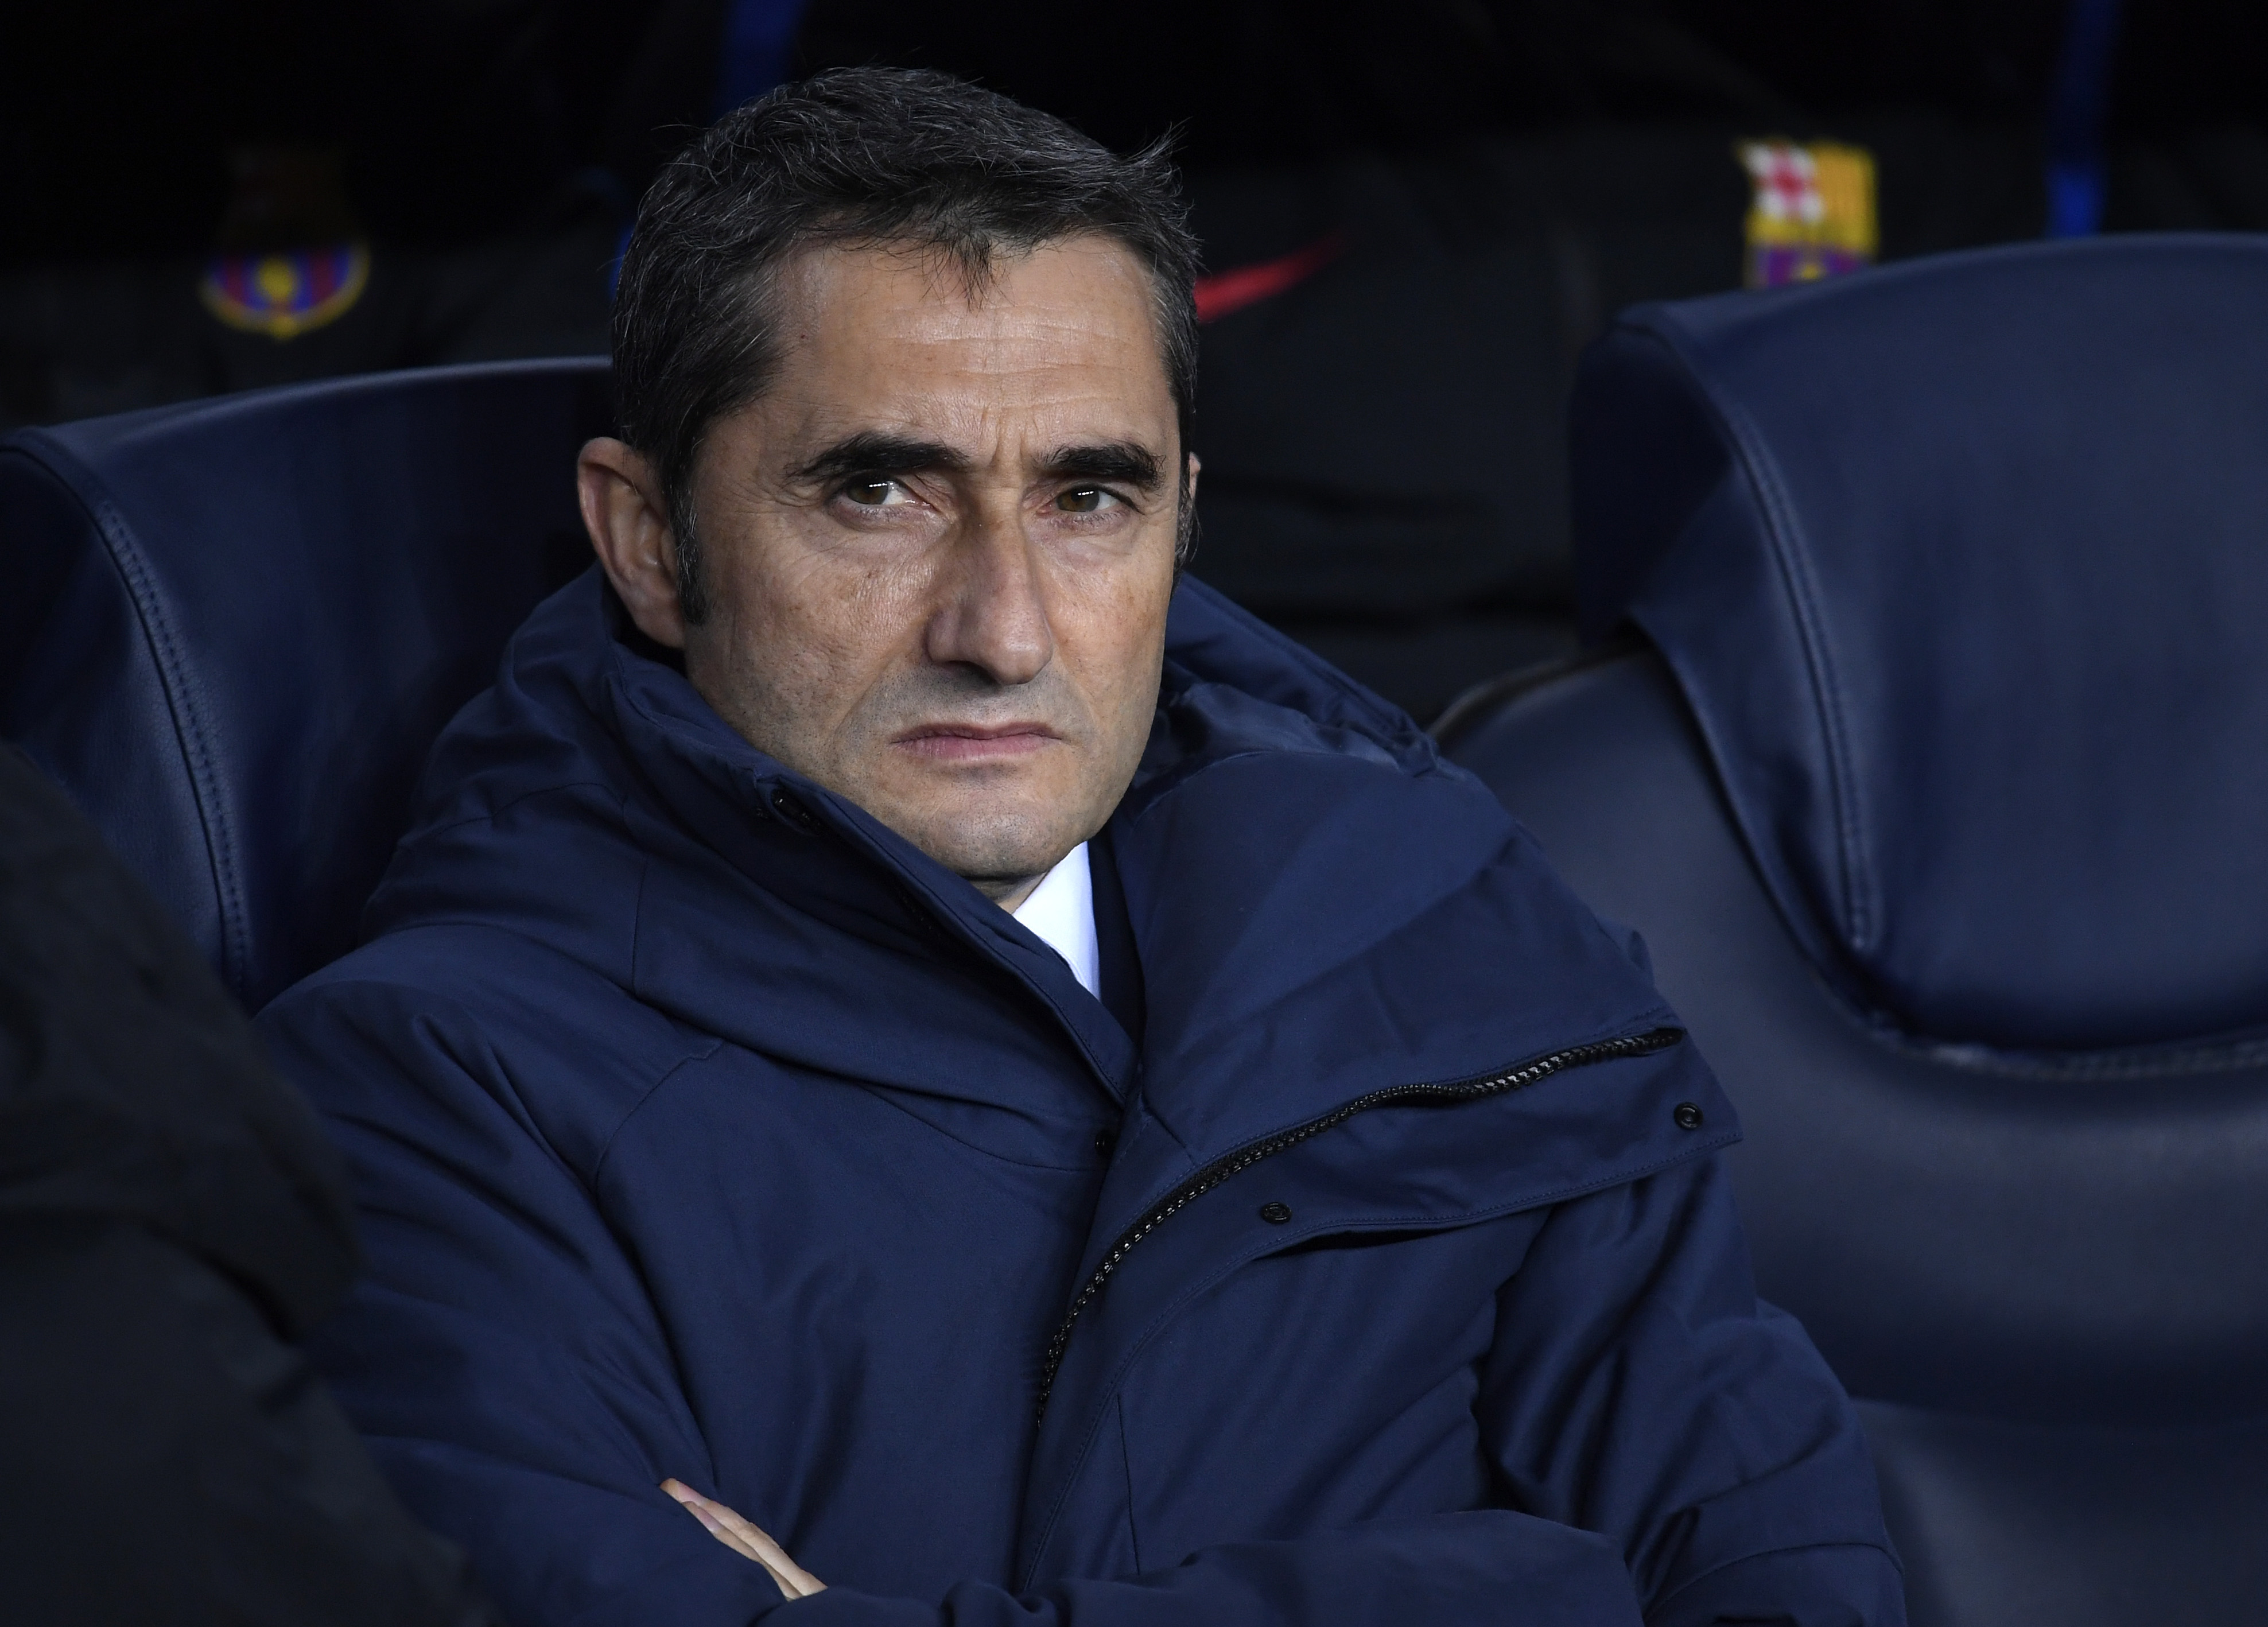 BARCELONA, SPAIN - DECEMBER 05:  Ernesto Valverde, coach of Barcelona  during the UEFA Champions League group D match between FC Barcelona and Sporting CP at Camp Nou on December 5, 2017 in Barcelona, Spain.  (Photo by Alex Caparros/Getty Images)